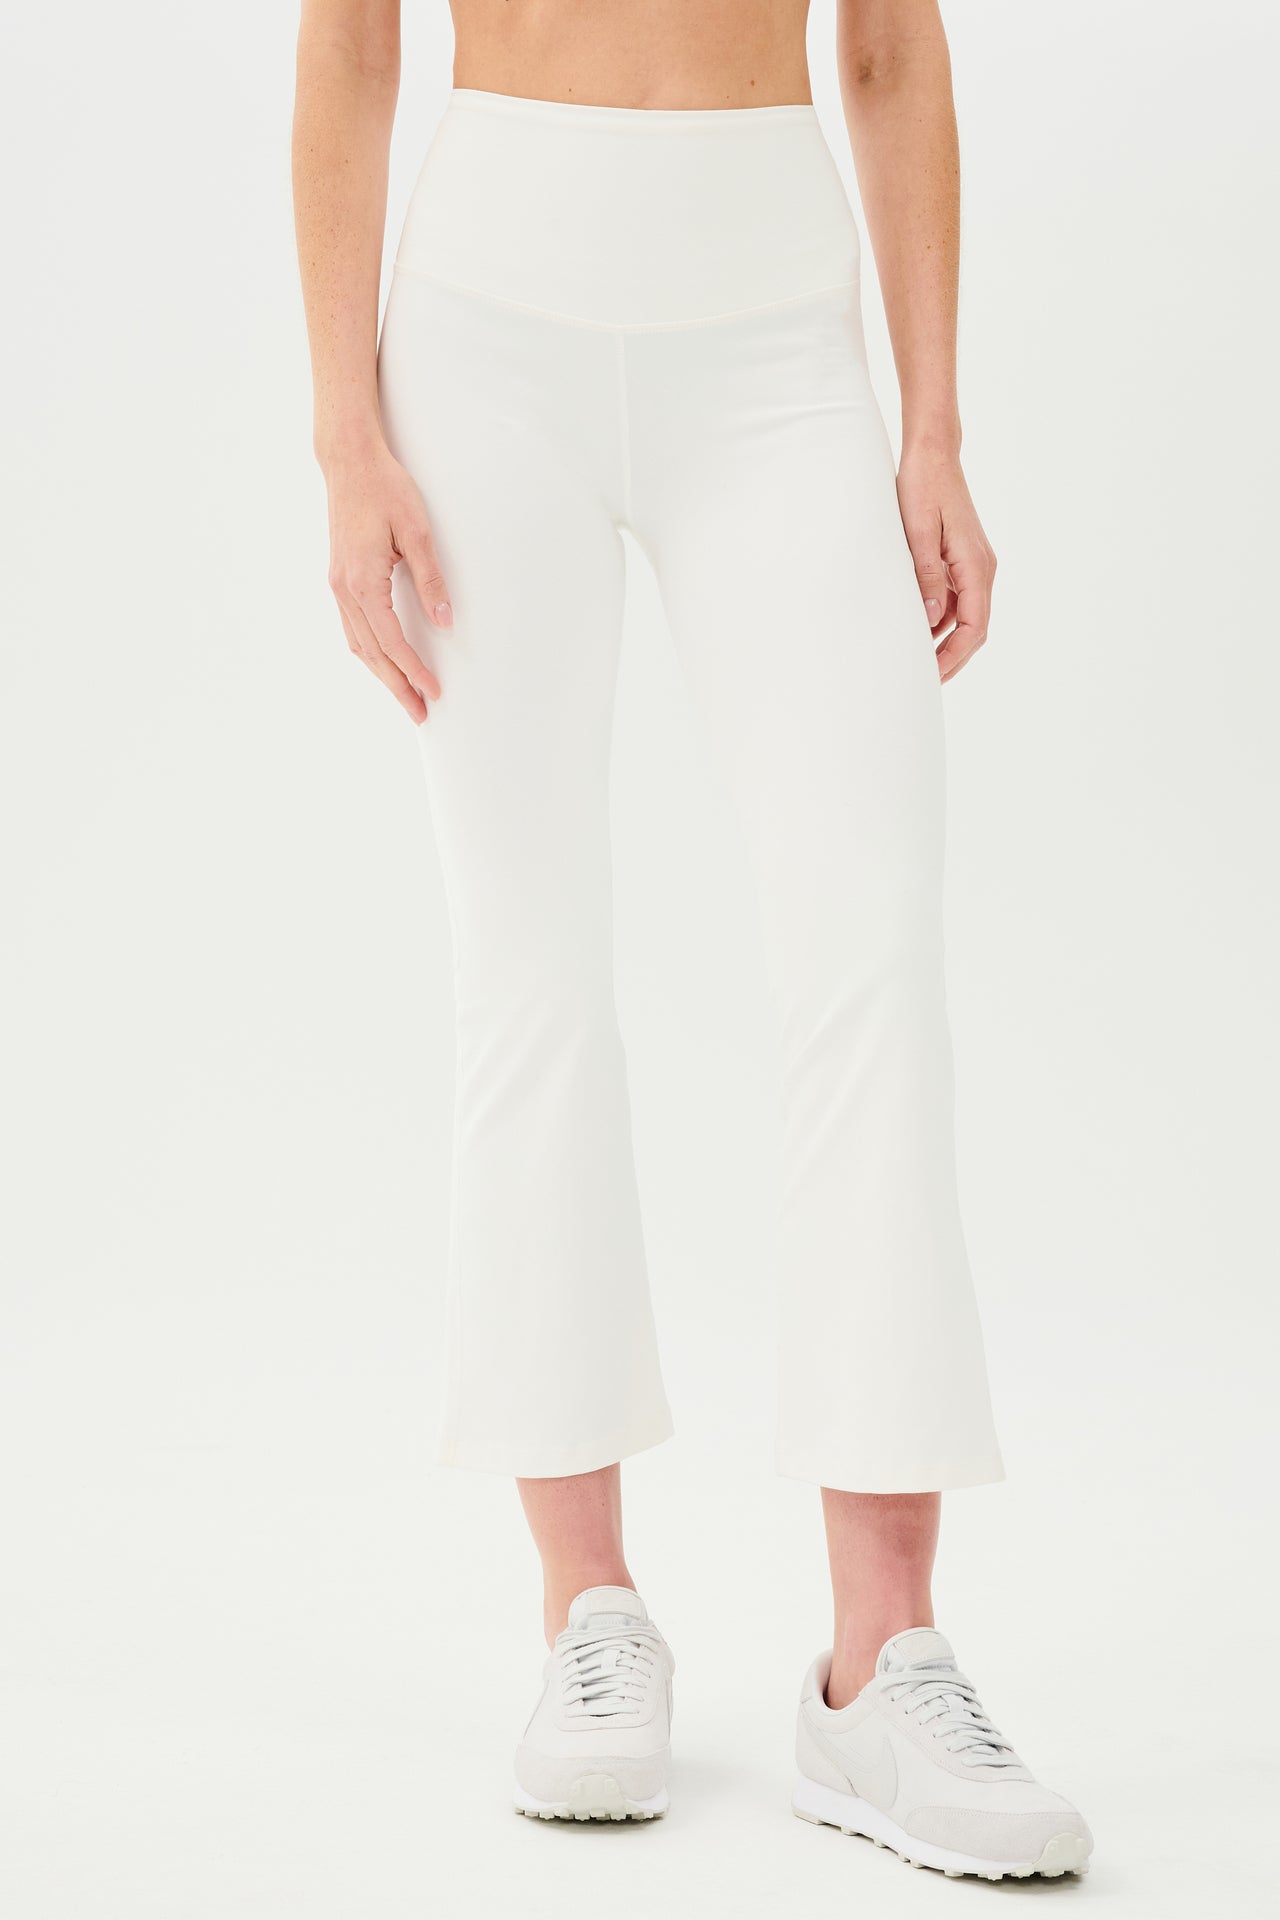 A woman wearing SPLITS59's Raquel High Waist Crop - White pants and a white tee designed for workout with 4-way stretch.